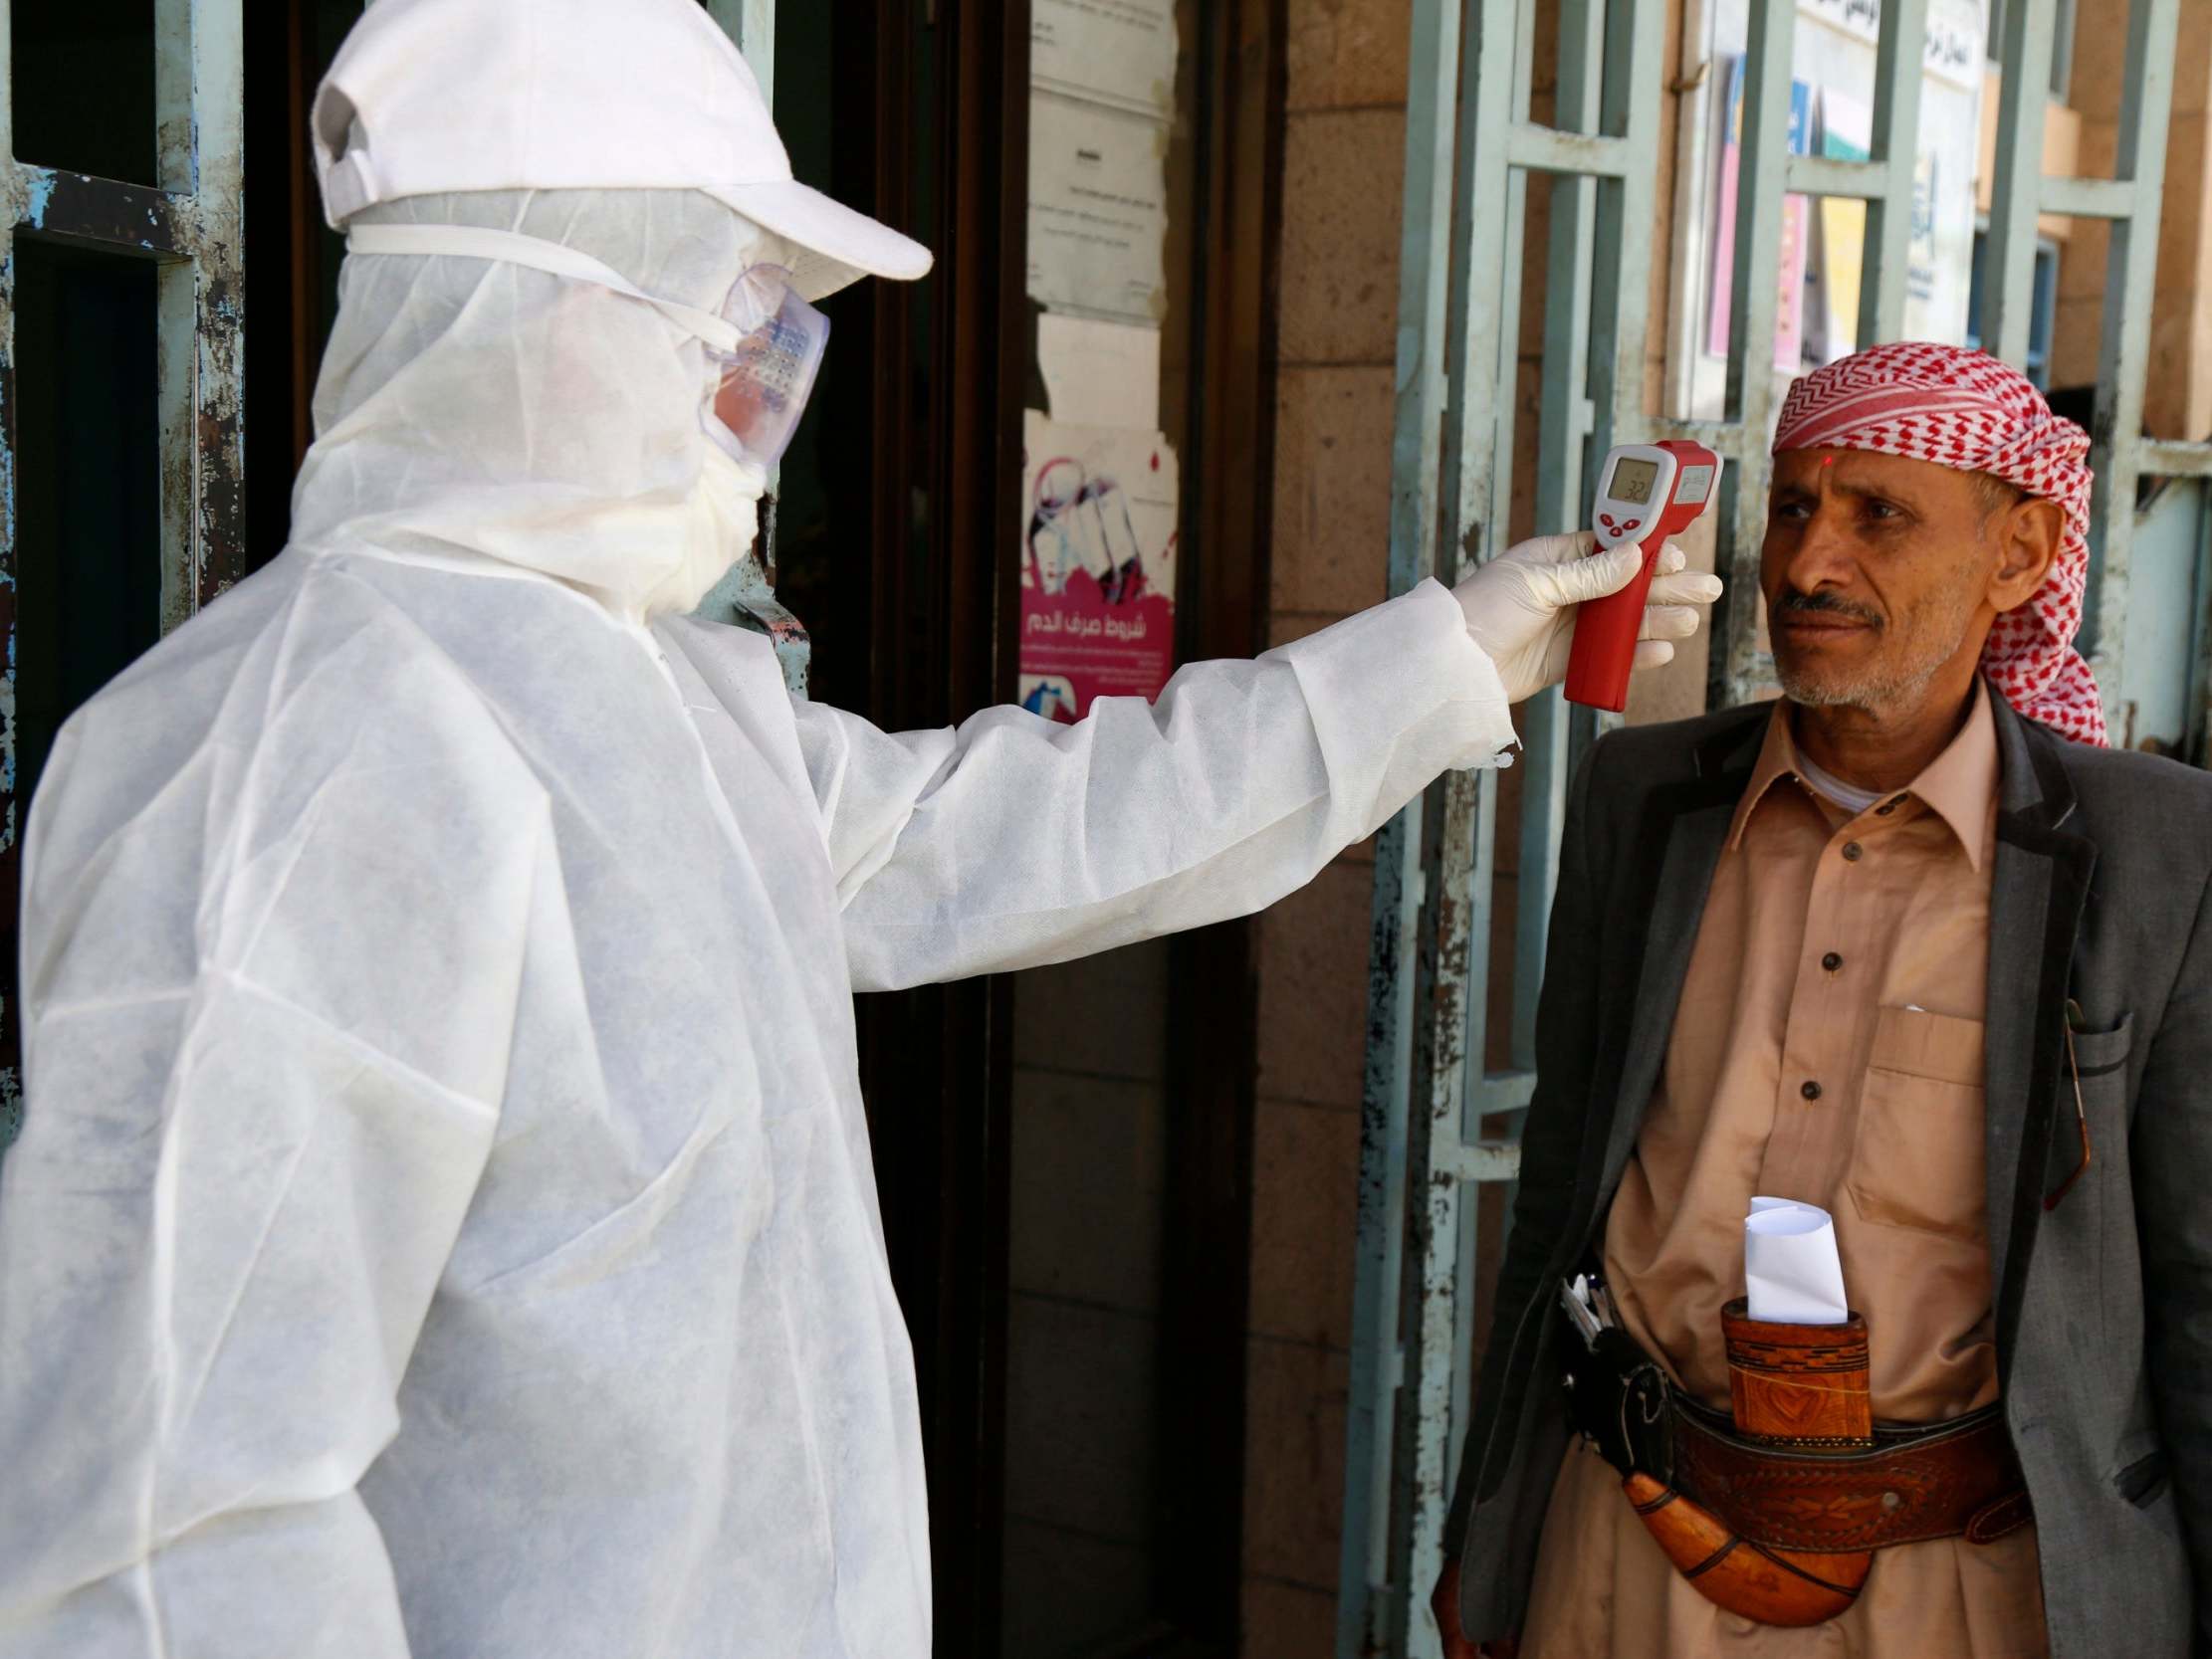 A medical worker measures the body temperature of a man at a state-run facility as a precautionary measure to combat Covid-19 on 24 March 2020 in Sana'a, Yemen.